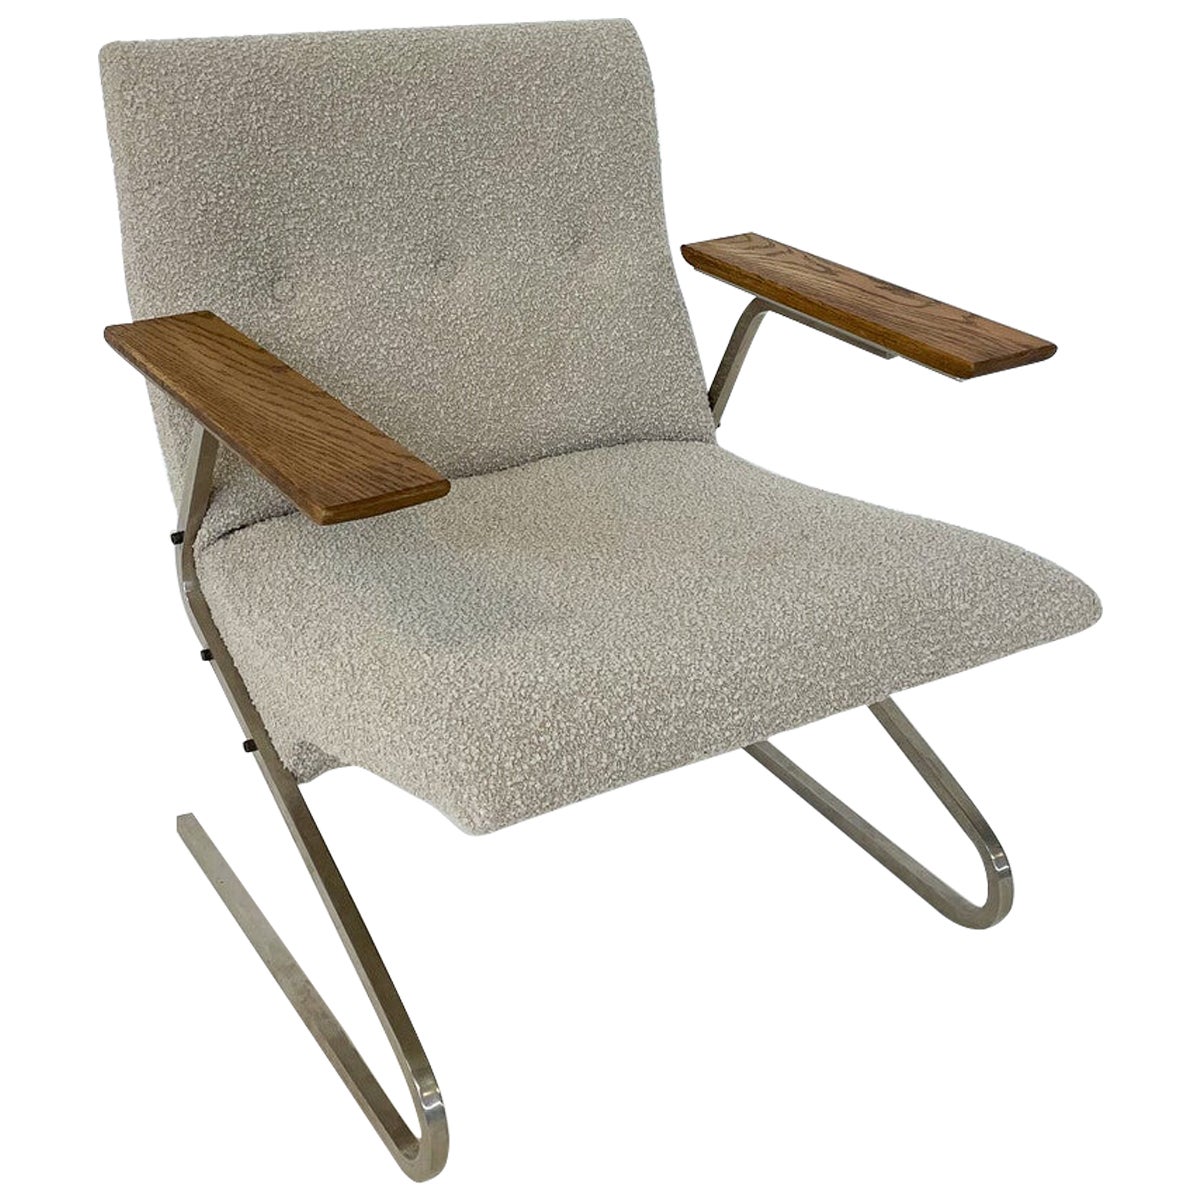 Mid-Century Modern Armchair ‘Cantilever’ by George van Rijck for Beaufort  For Sale